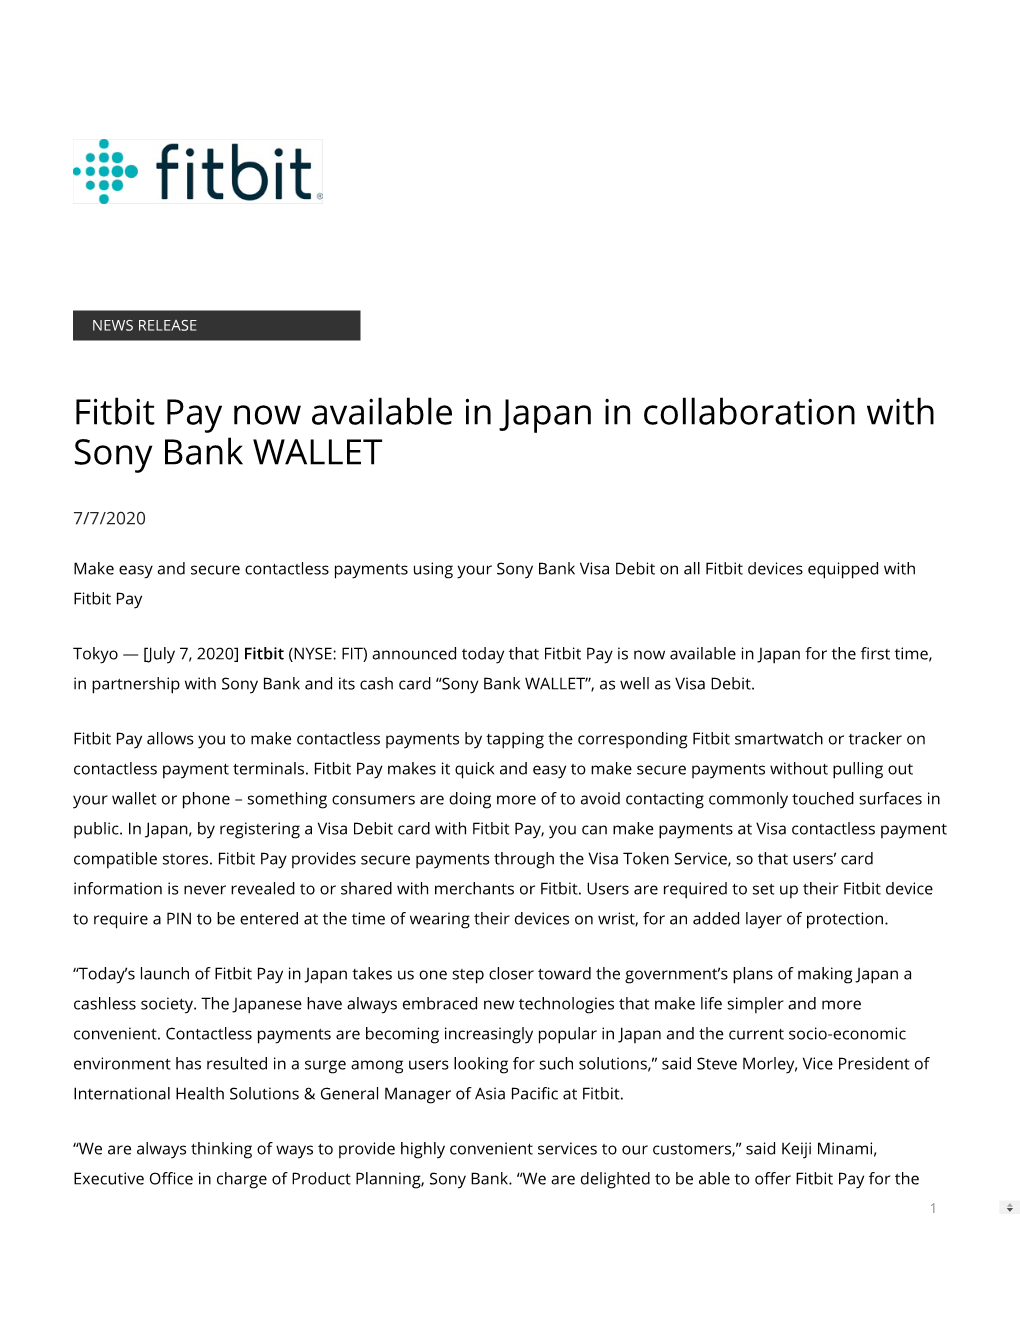 Fitbit Pay Now Available in Japan in Collaboration with Sony Bank WALLET